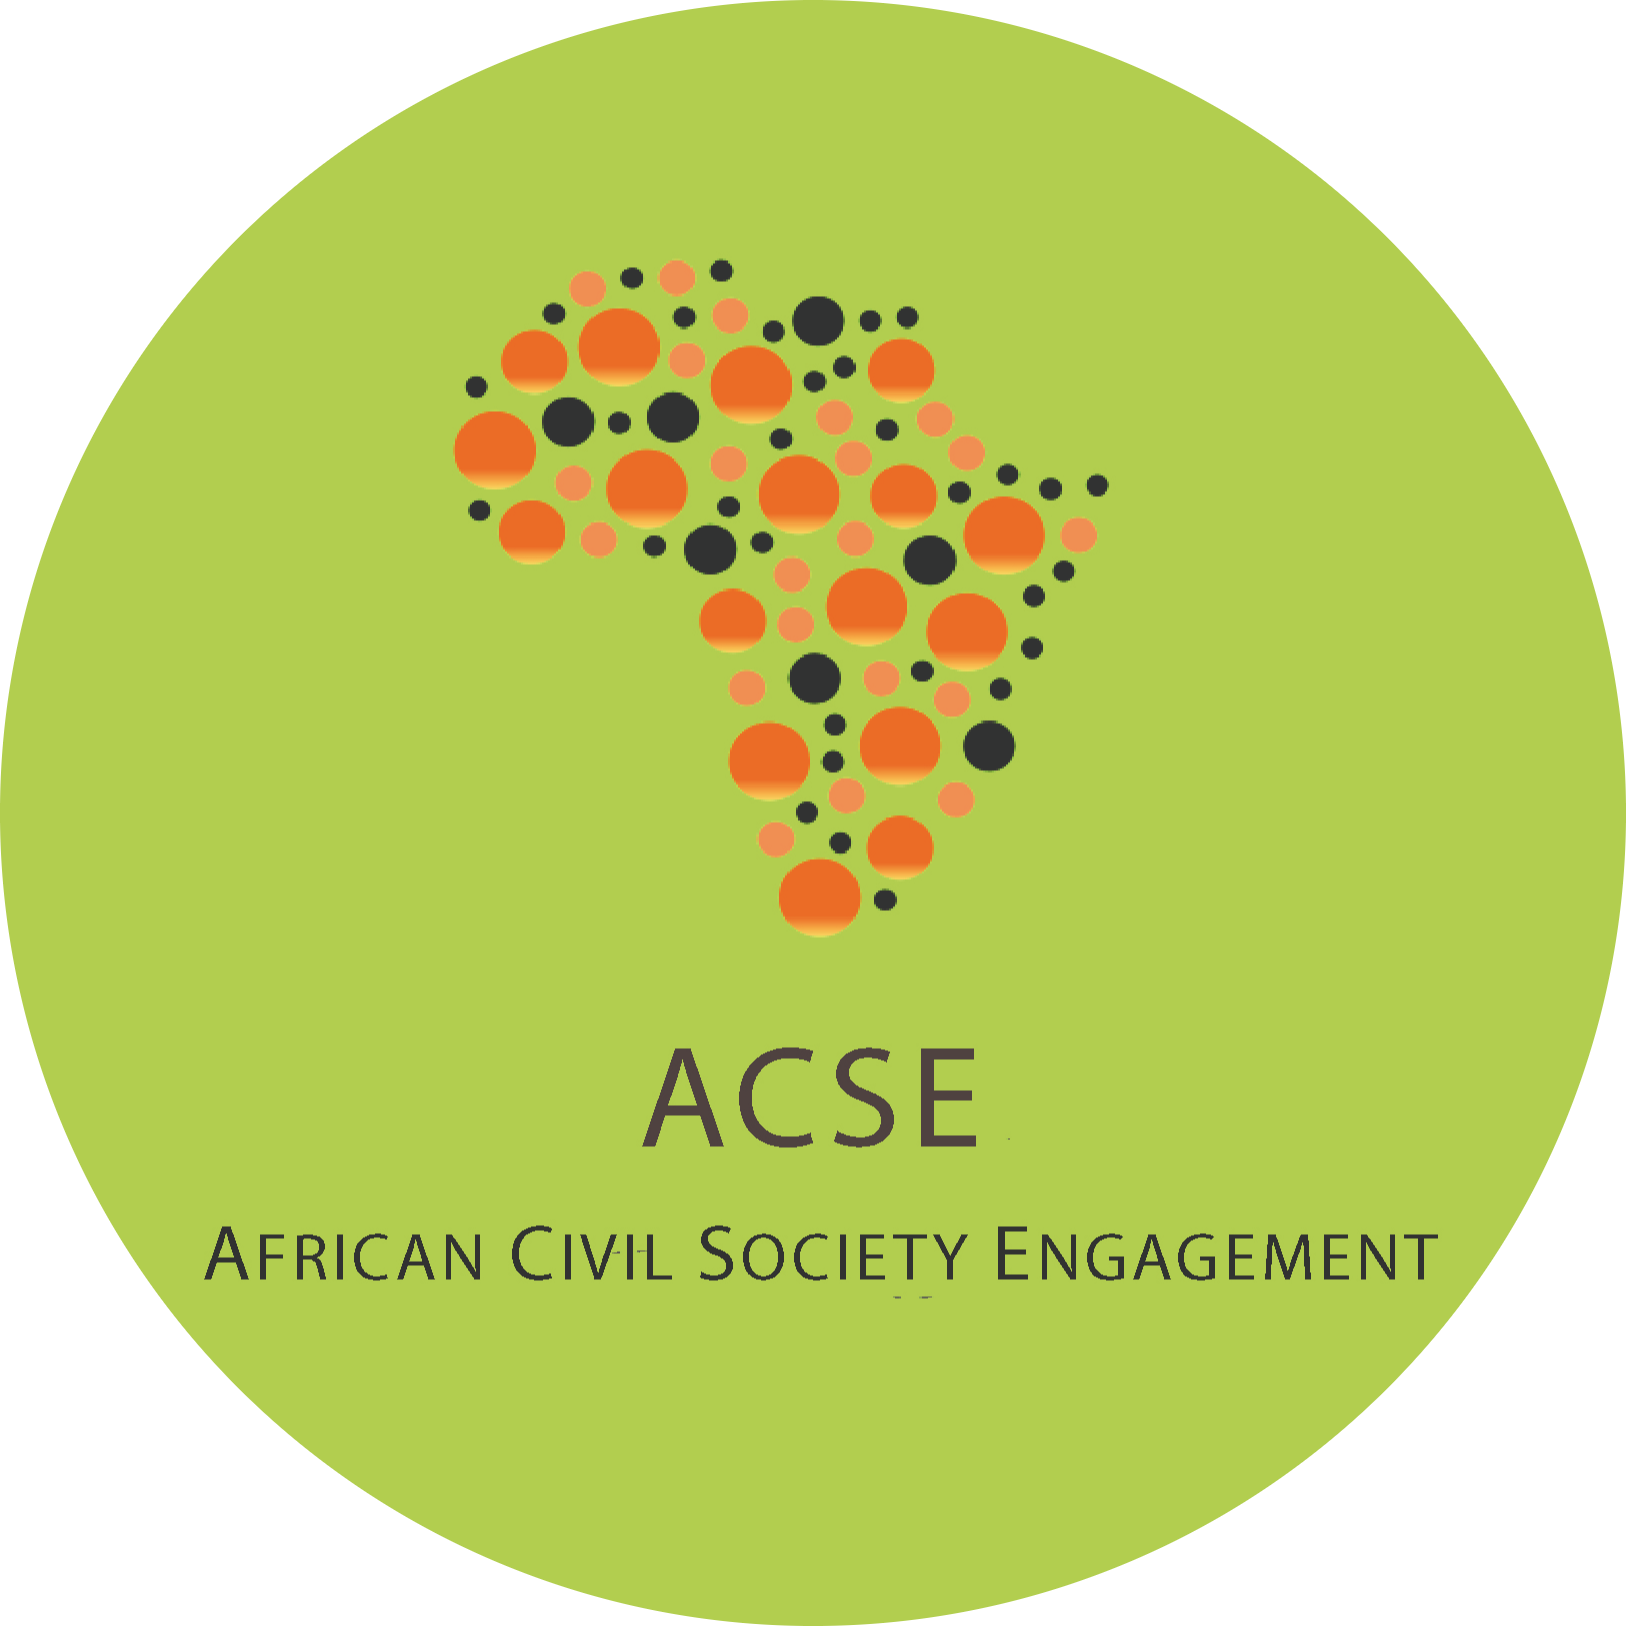 African Civil Society Engagement